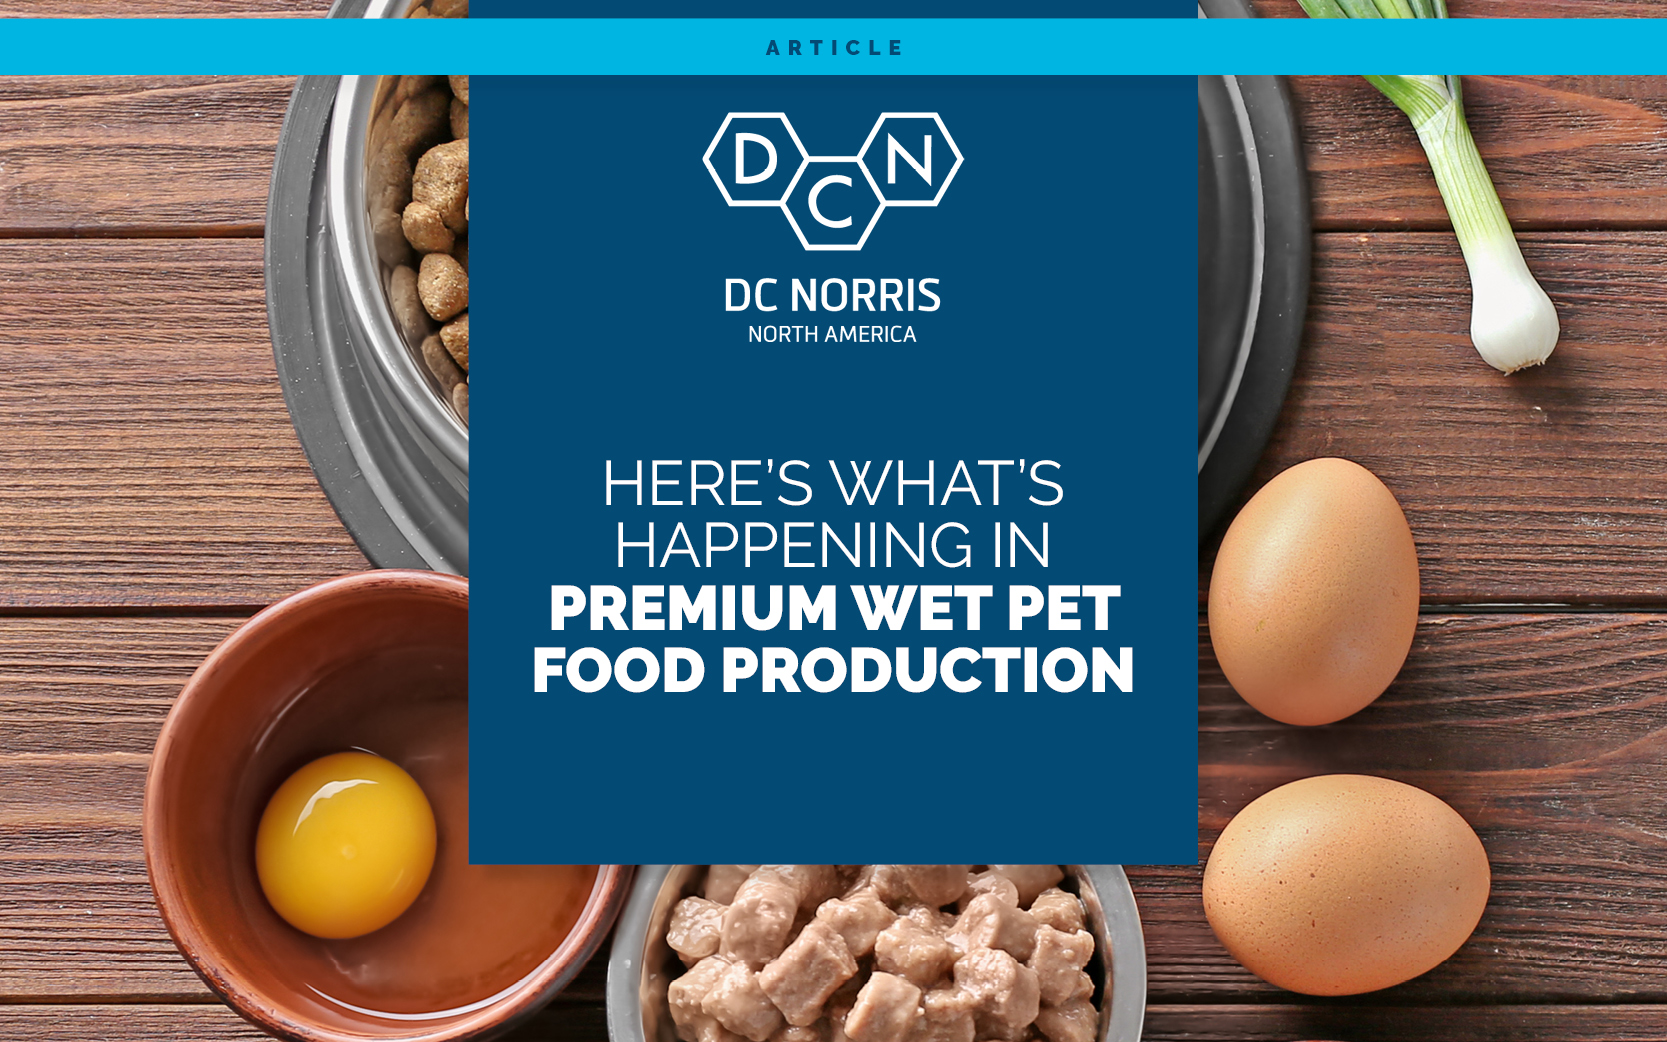 high quality pet food ingredients like eggs and vegetables arranged on a wooden background. A blue banner hangs over top and below the DC Norris North America logo reads: Here's What's Happening in Premium Wet Pet Food Production Now